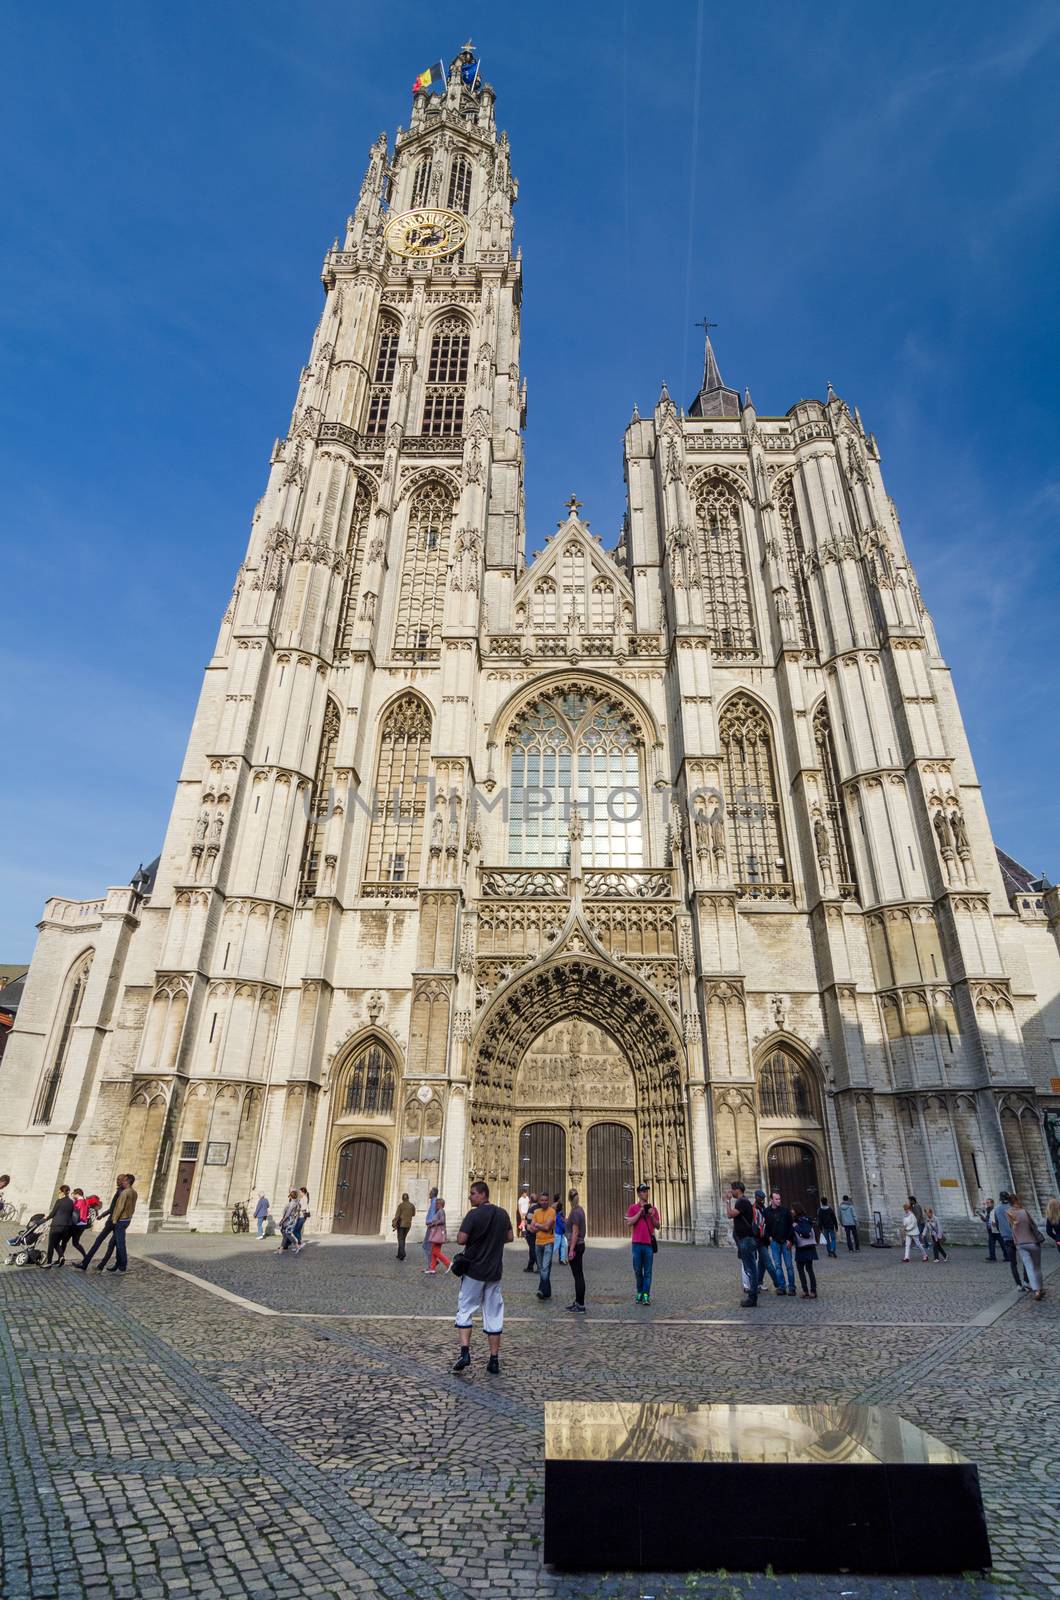 Antwerp, Belgium - May 10, 2015: Tourist visit Cathedral of Our Lady in Antwerp, Belgium. by siraanamwong